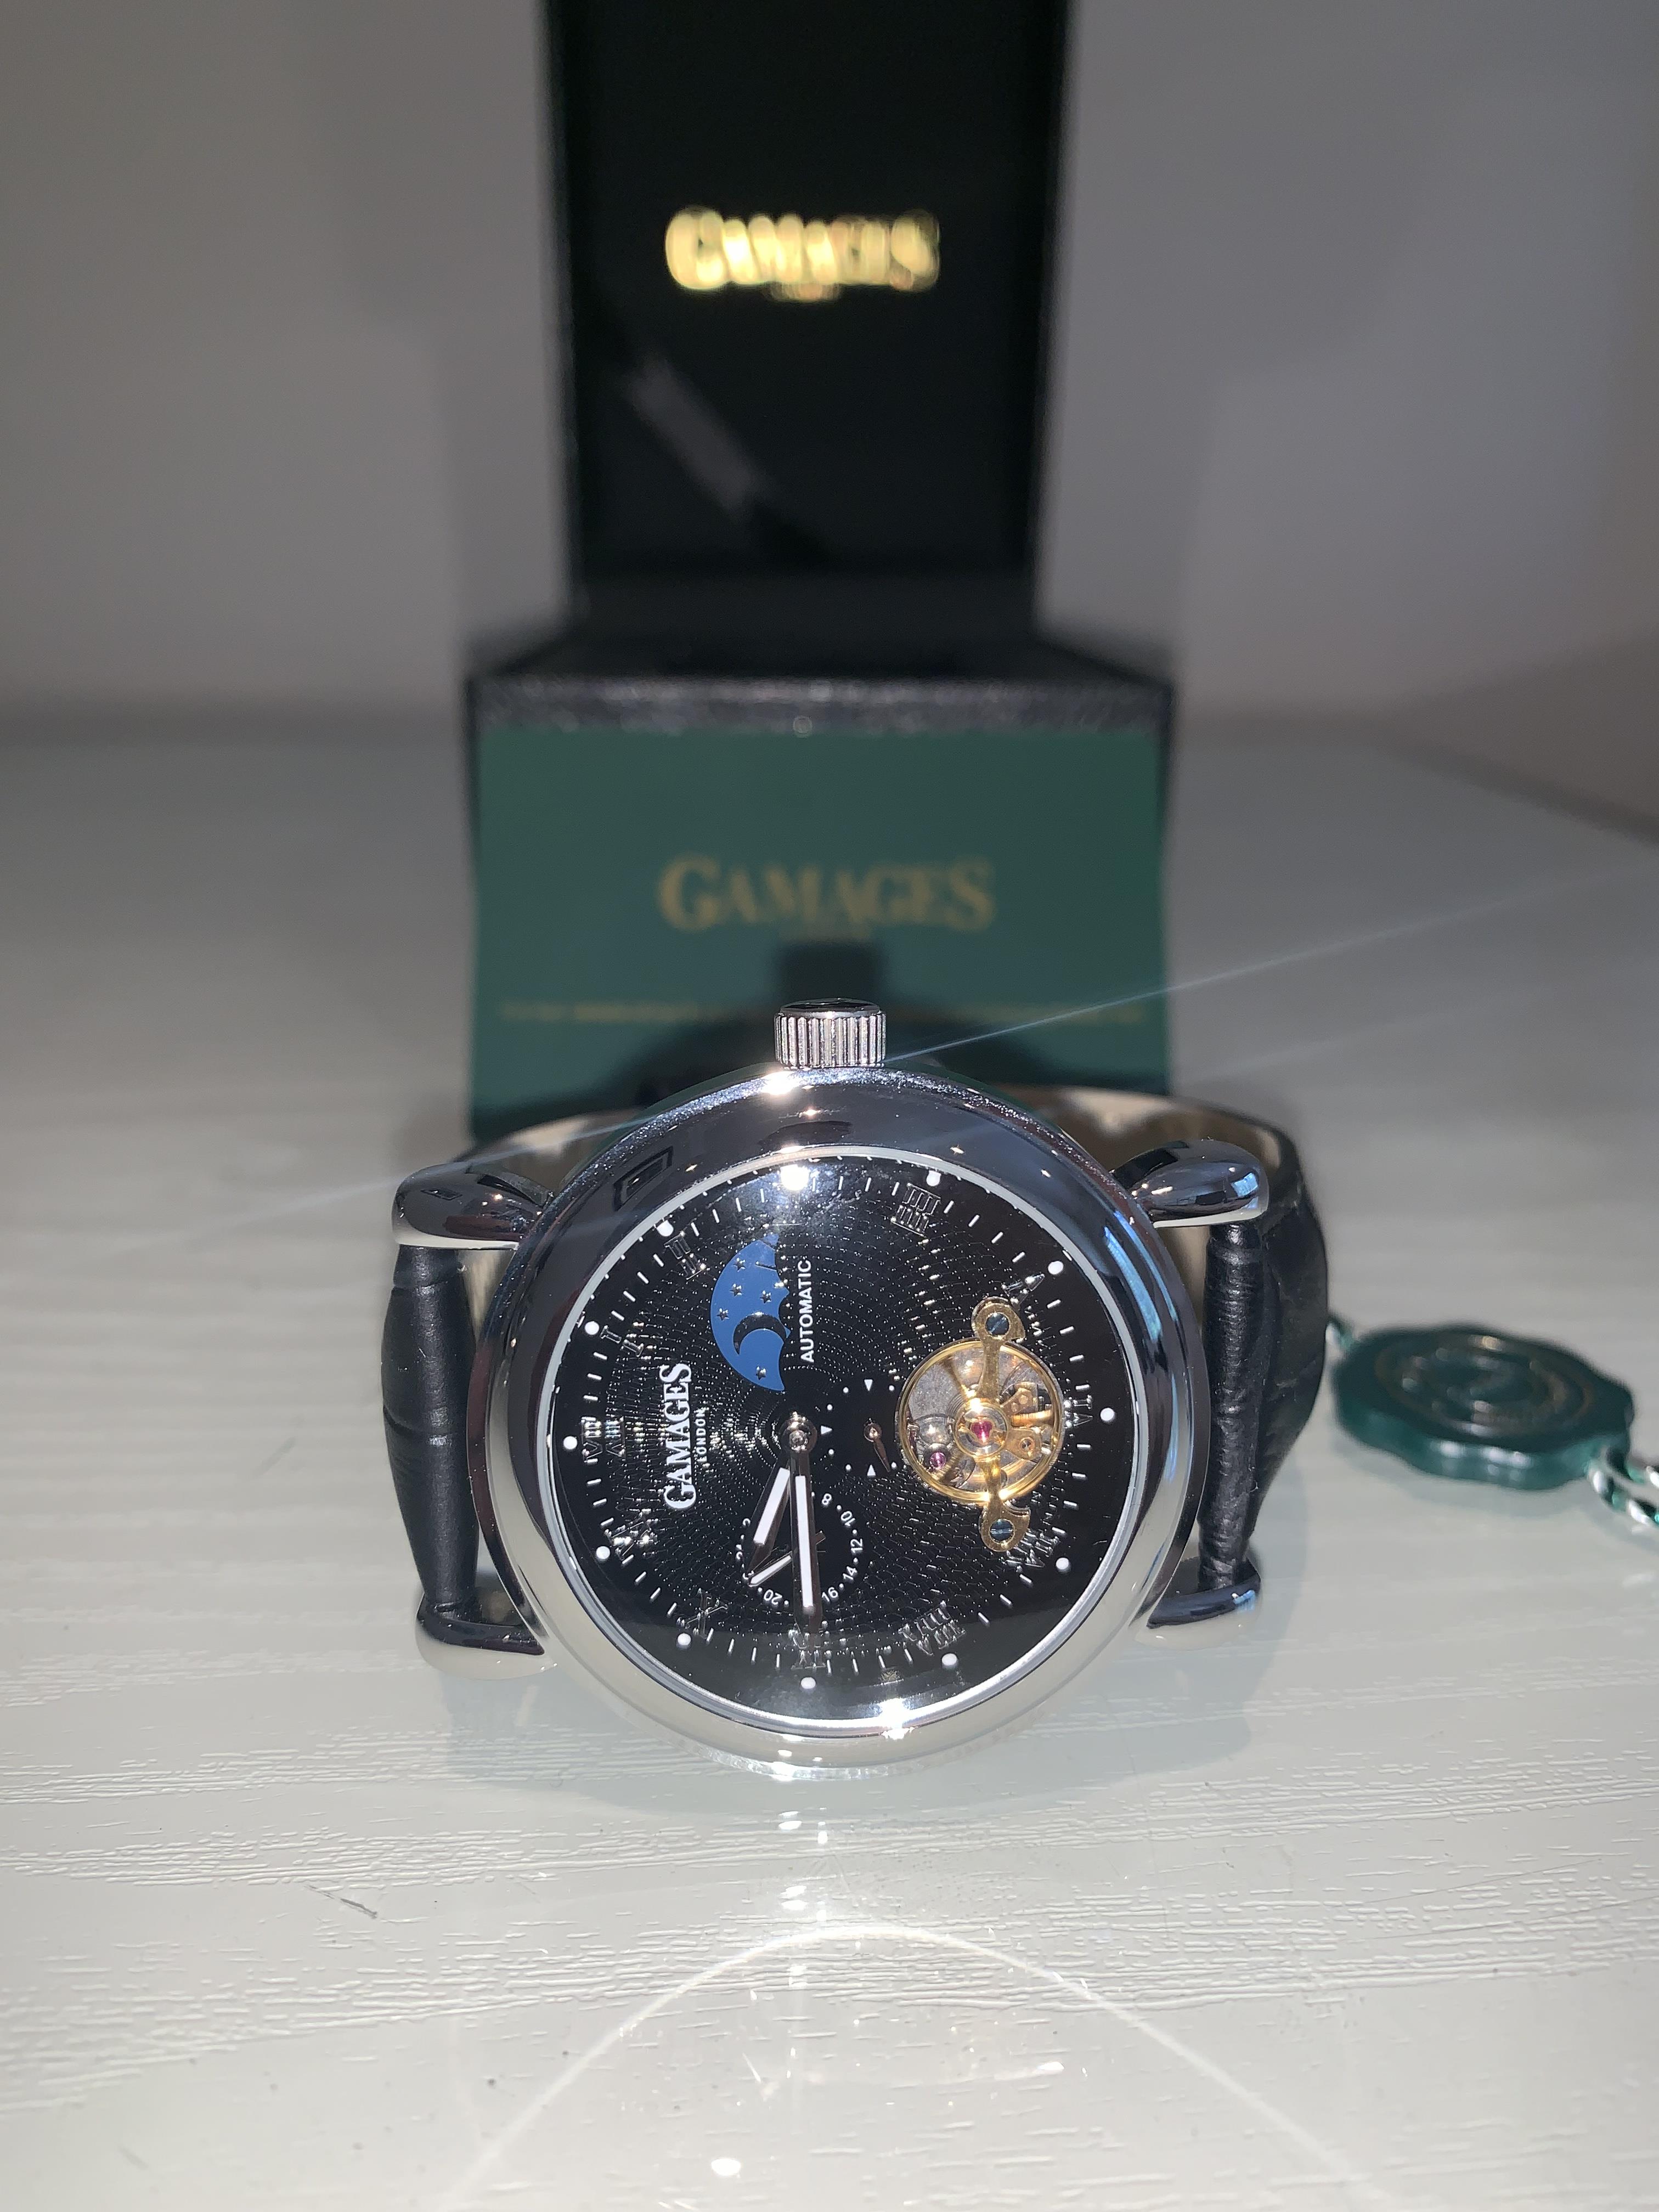 Limited Edition Hand Assembled Gamages Moon Phase Automatic Steel – 5 Year Warranty & Free Delivery - Image 4 of 6